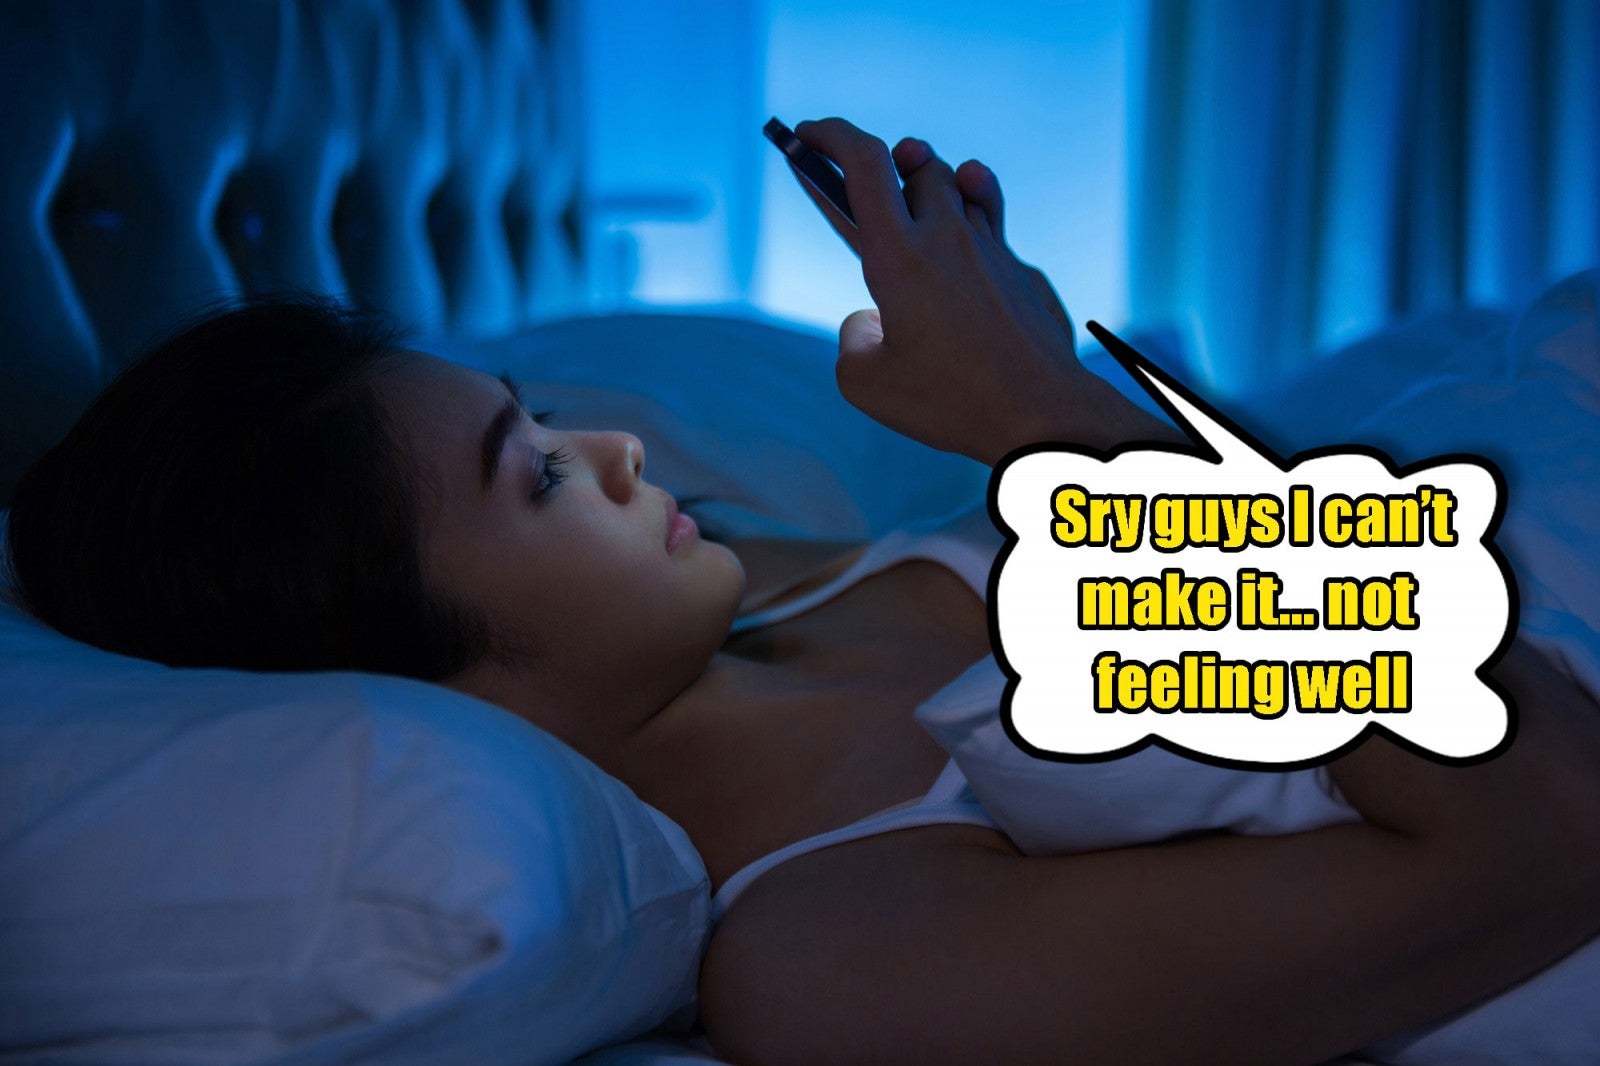 X Things All Malaysians Who Always Wake Up Late Can 12/10 Relate to - WORLD OF BUZZ 3